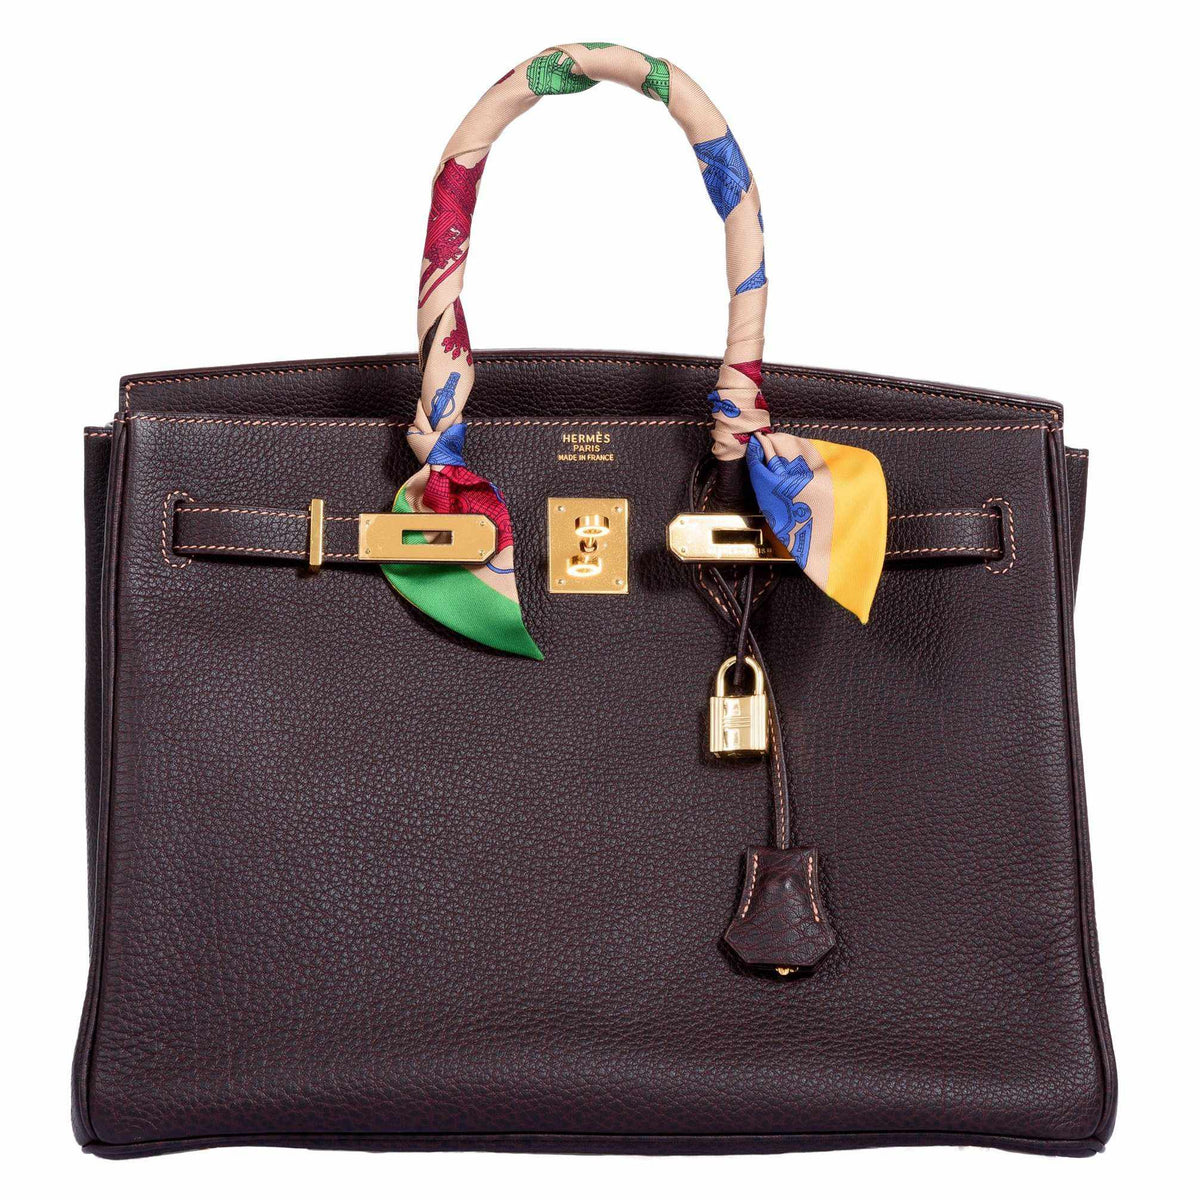 Hermès 35cm Brown Birkin of Fjord Leather with Gold Hardware, Handbags and  Accessories Online, Ecommerce Retail